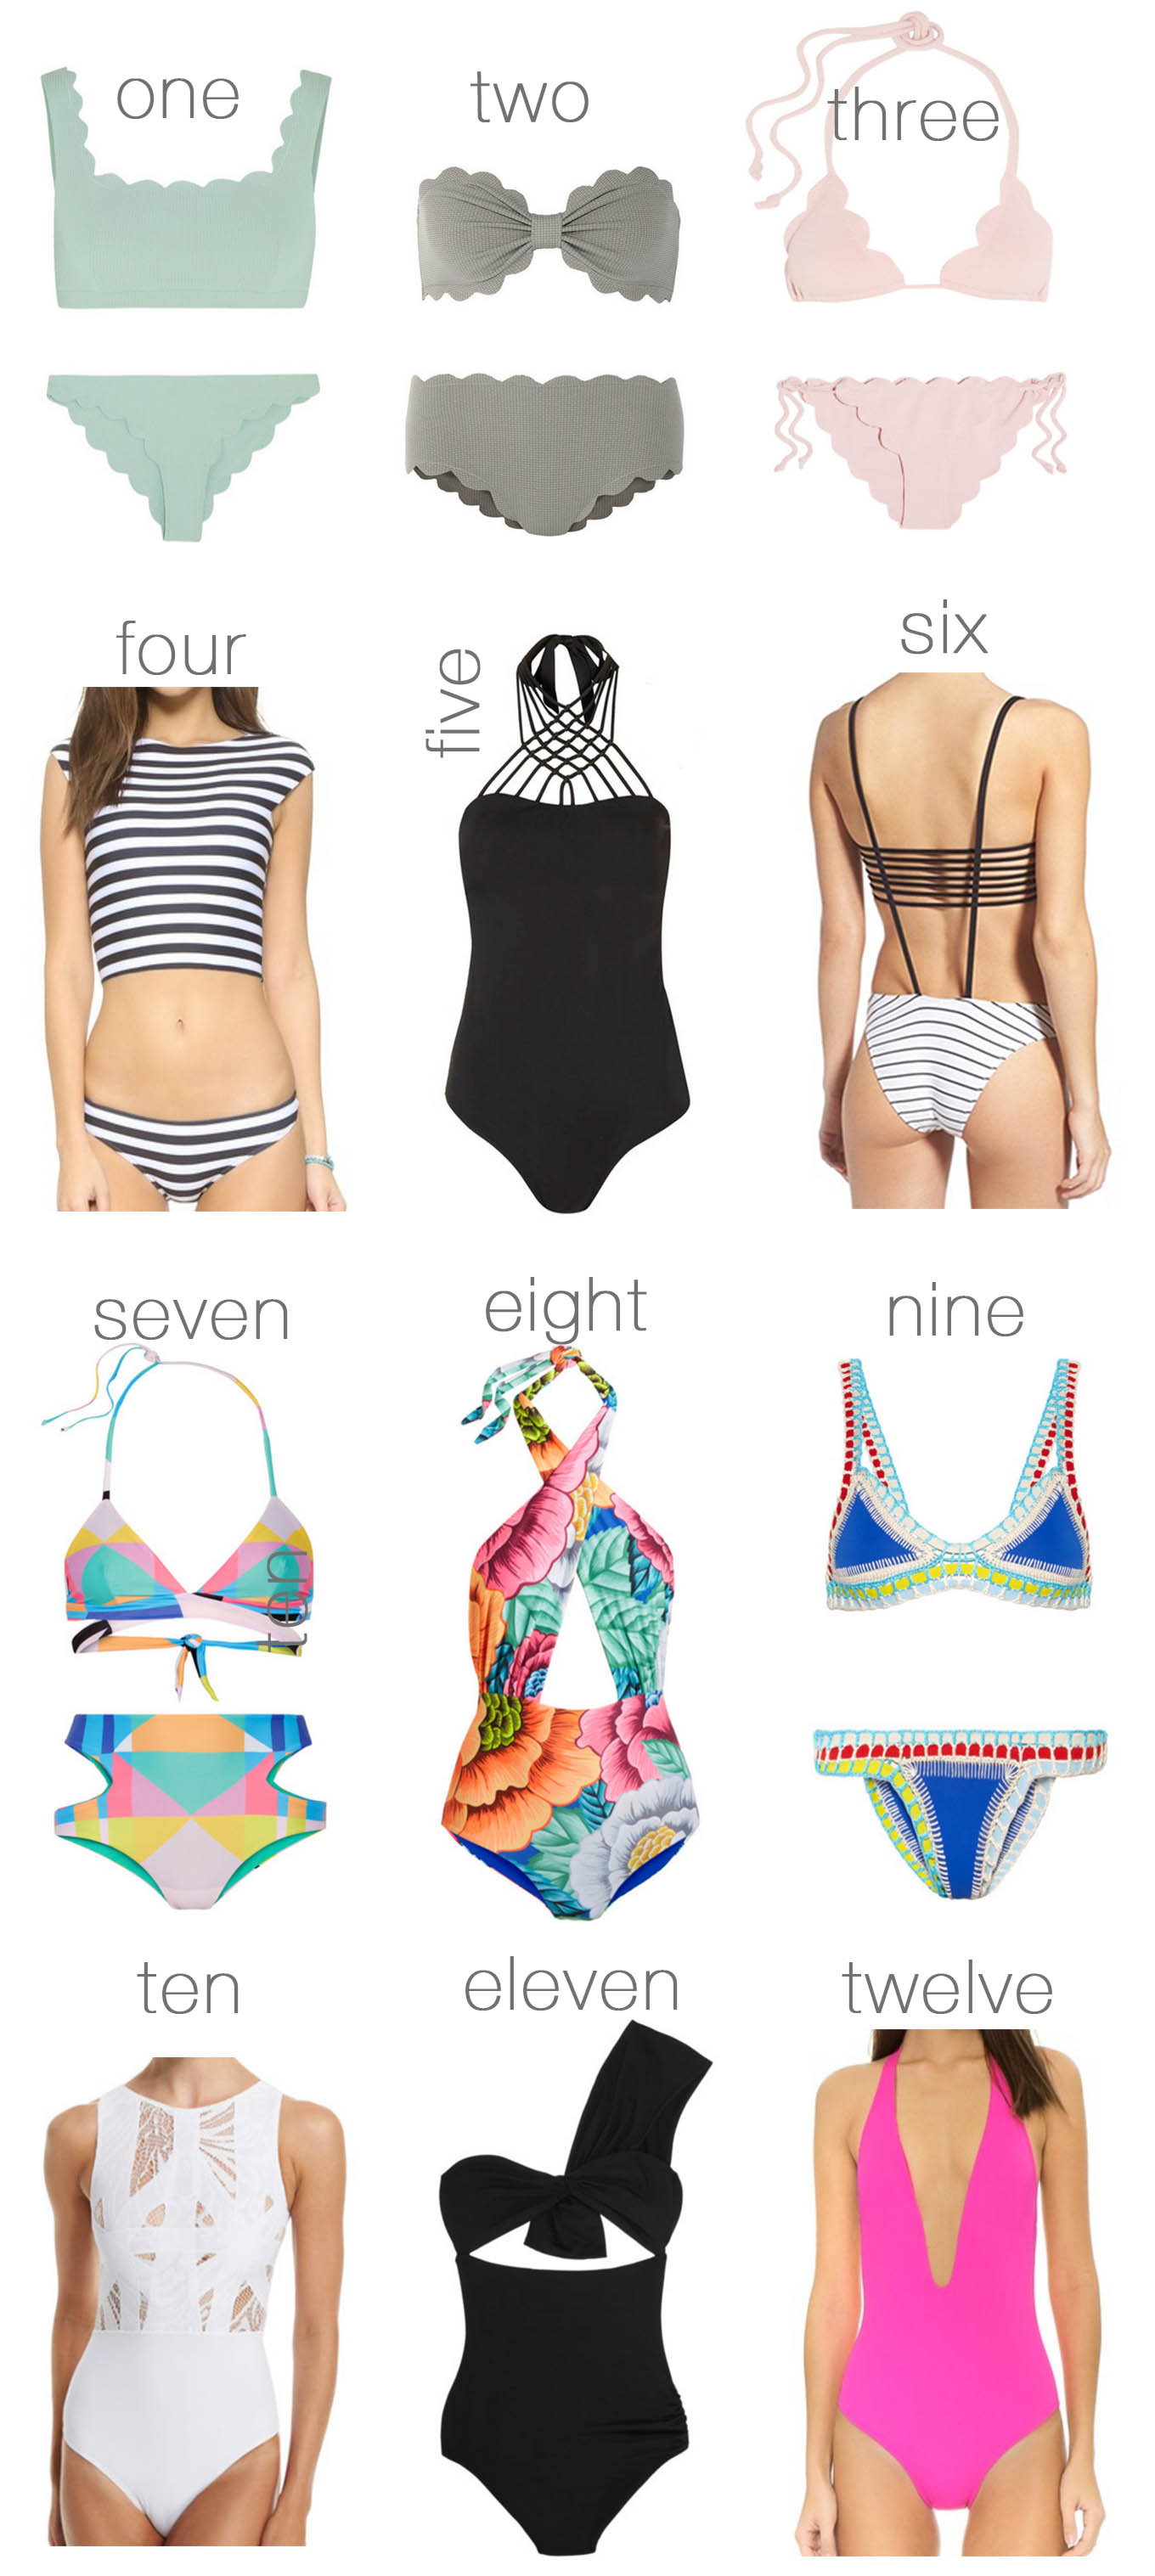 12 Swimsuits to Kick Off Your Summer in Style | Hello Fashion